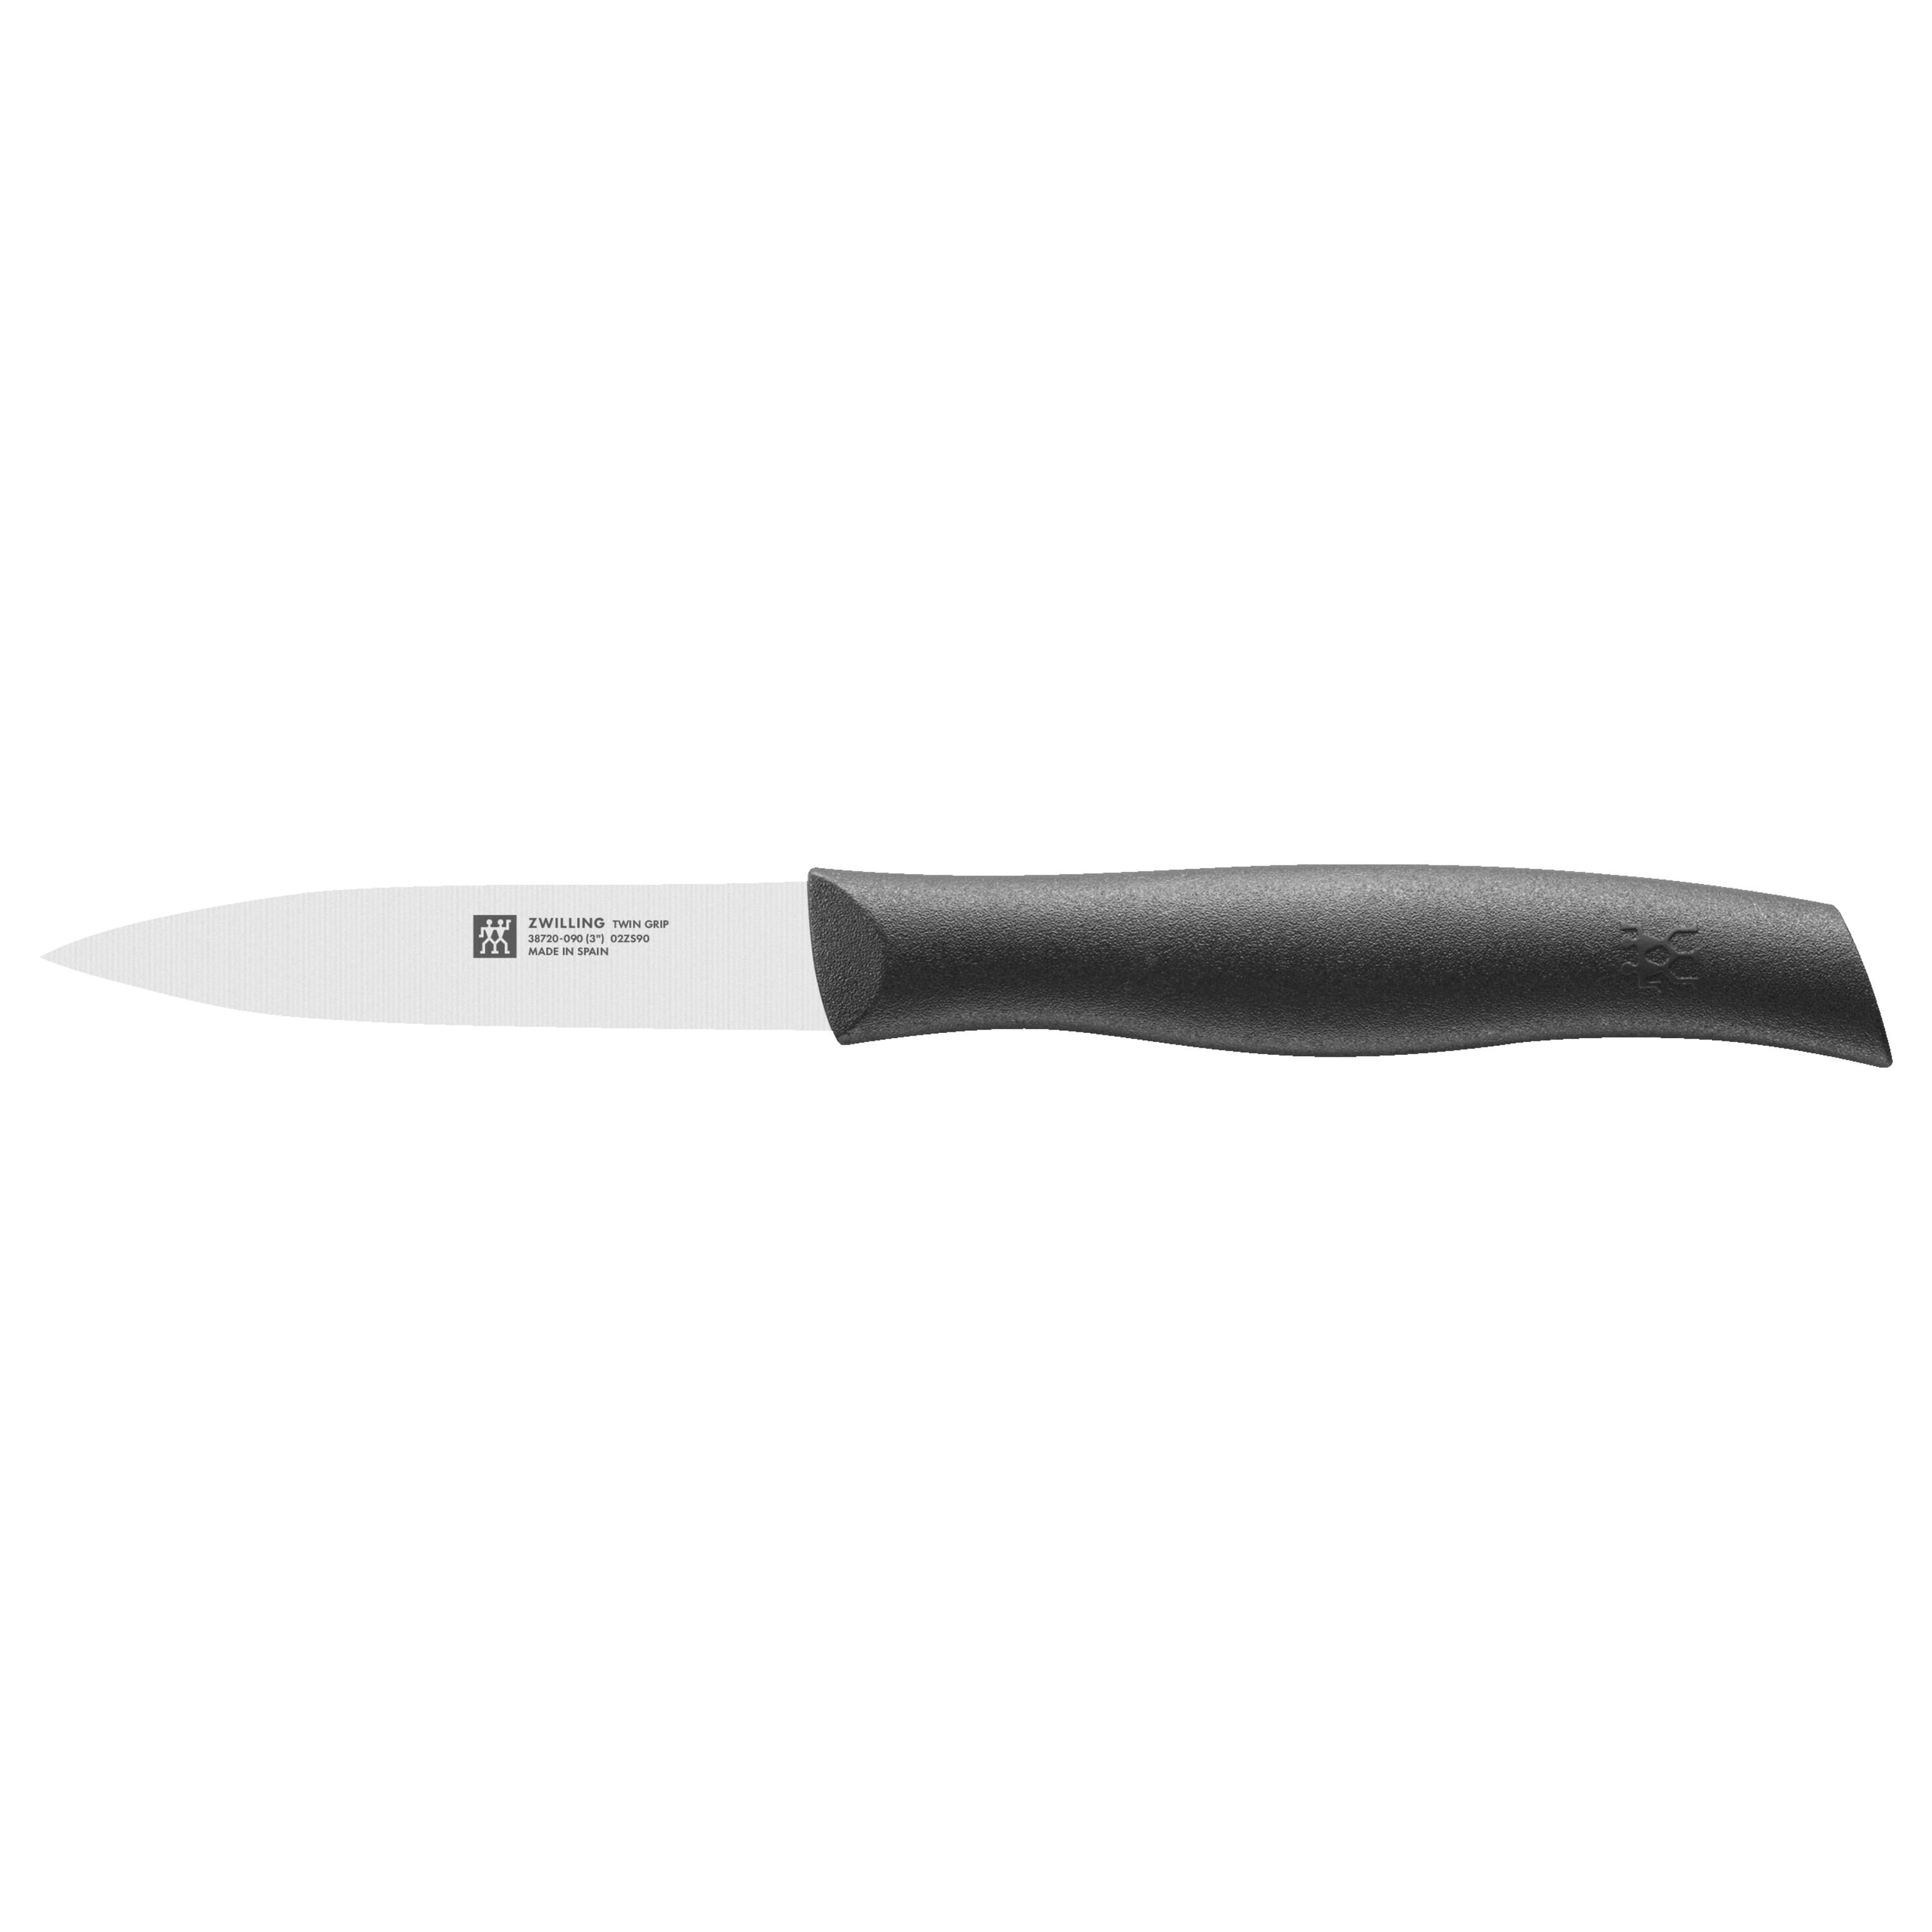 3.5 Paring Knife with Small Handle